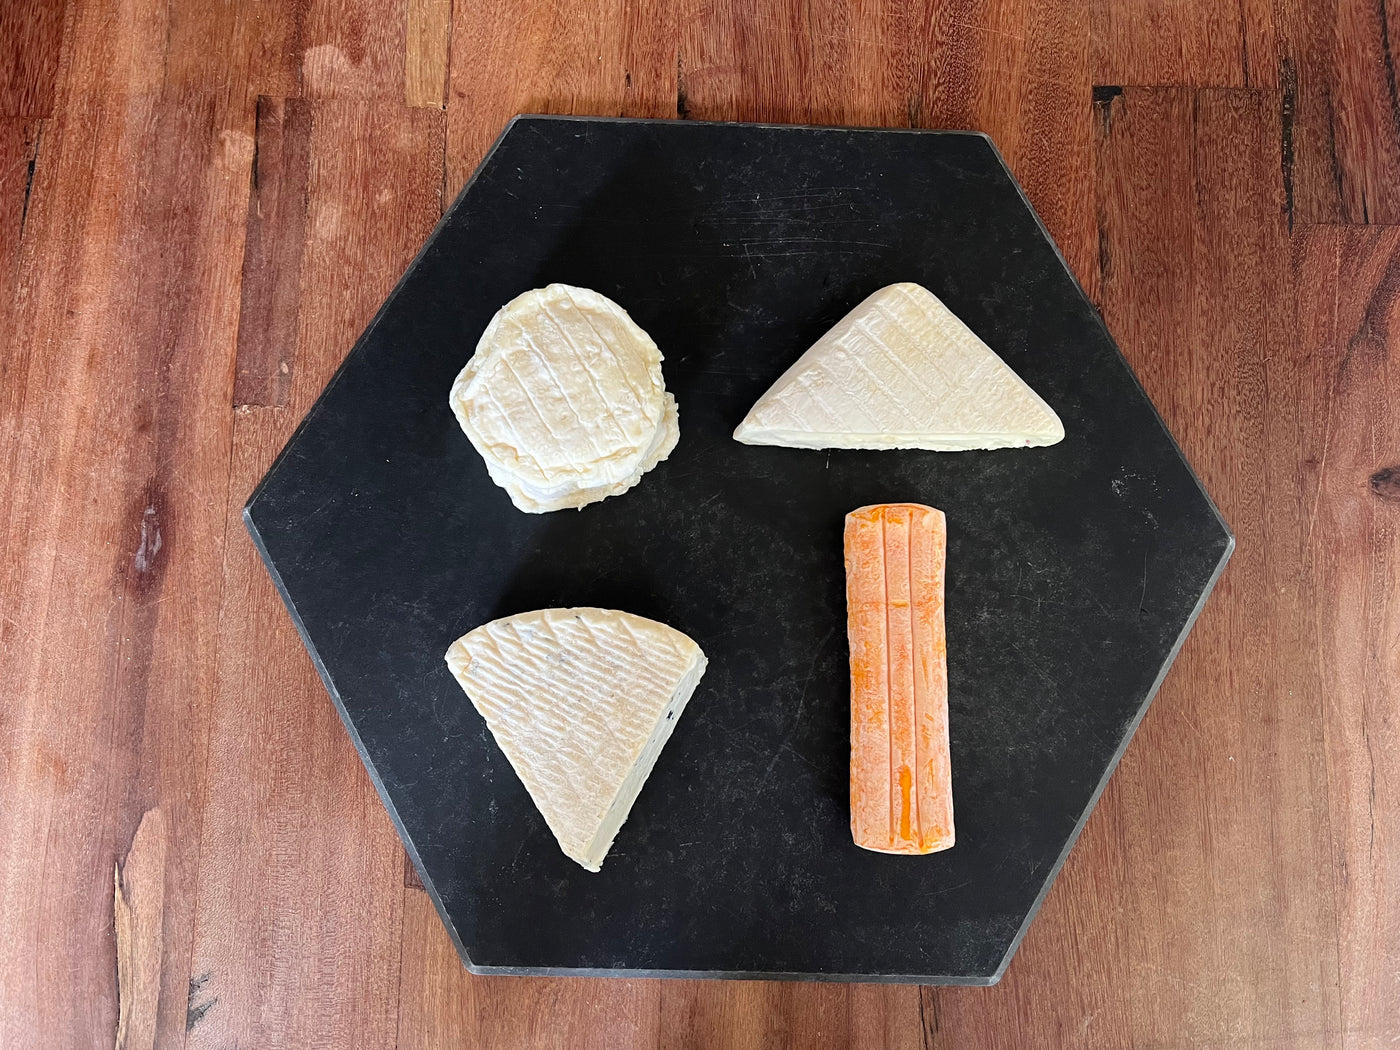 Black cheese board with four different shaped wedges and pieces of soft ripened cheese